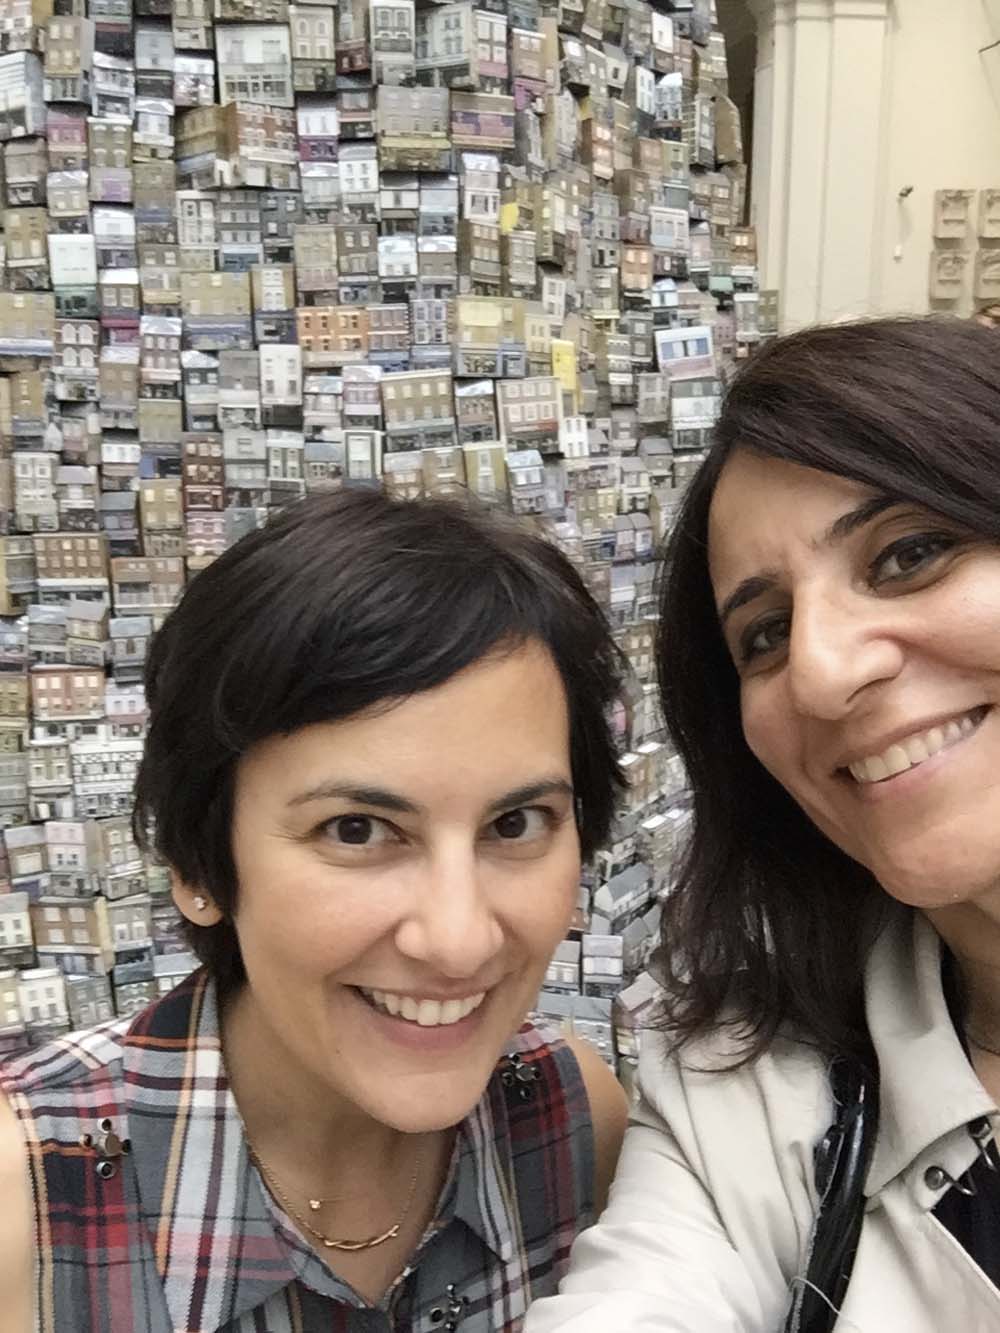 we selfie in front of barnaby barford's 'tower of babel' at the v&a